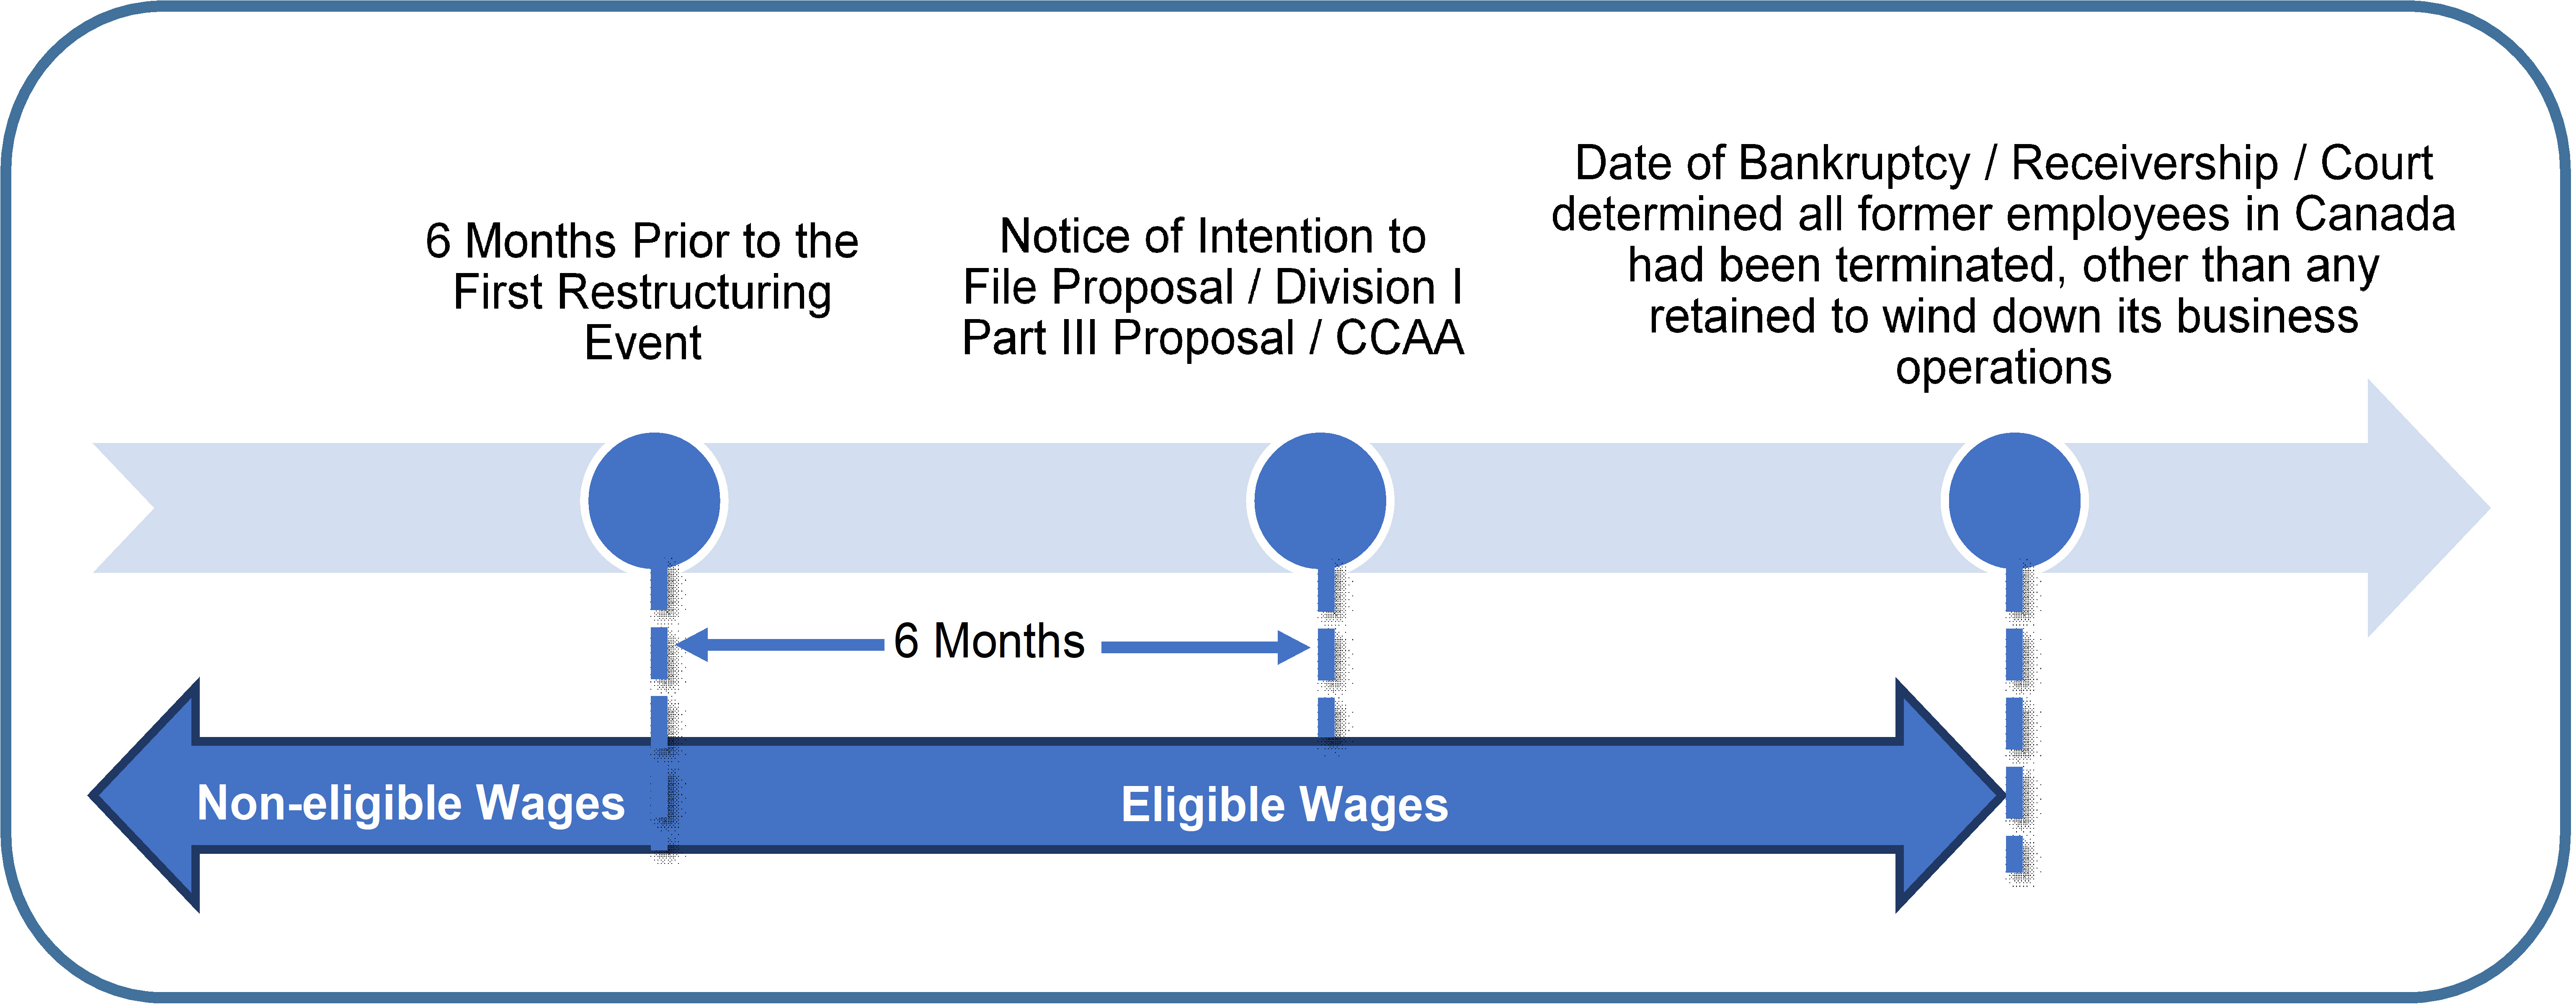 Image Timeline of qualifying restructuring events: description follows